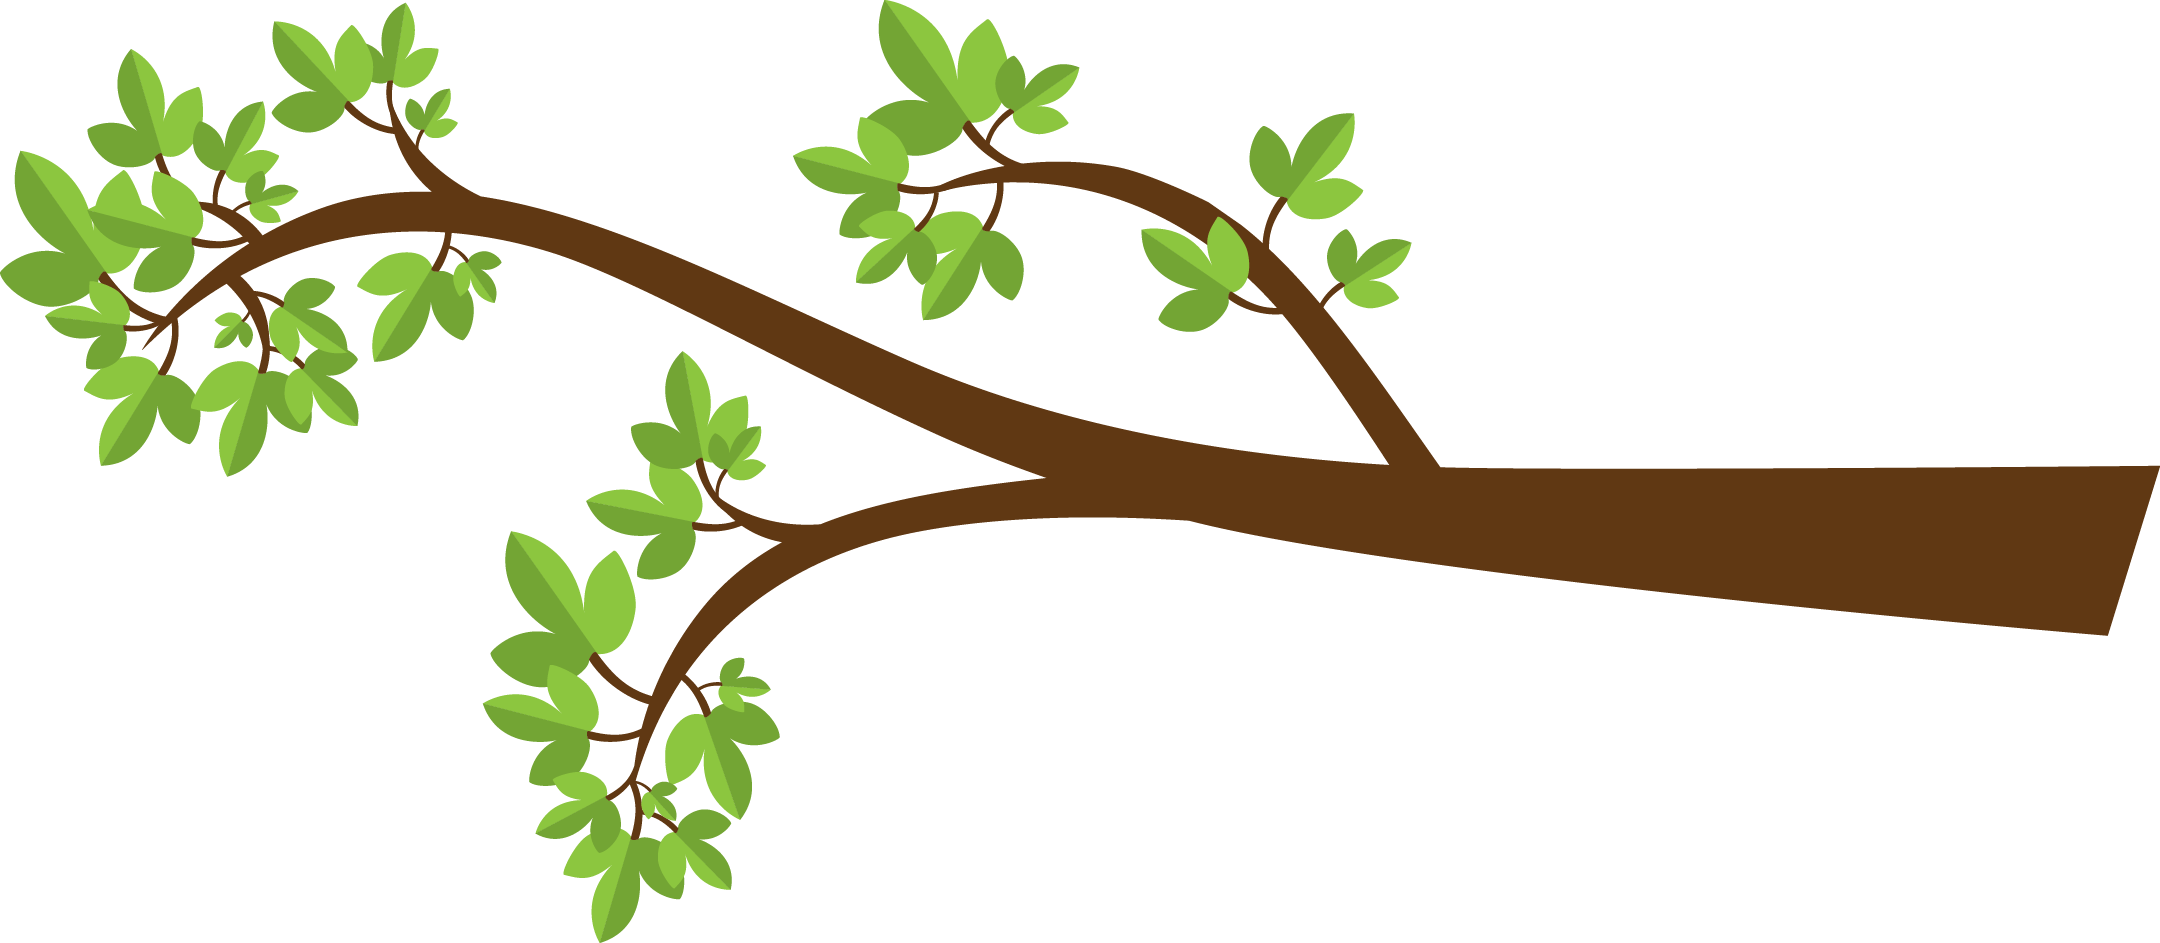 Image Of Tree Branch   Clipart Best